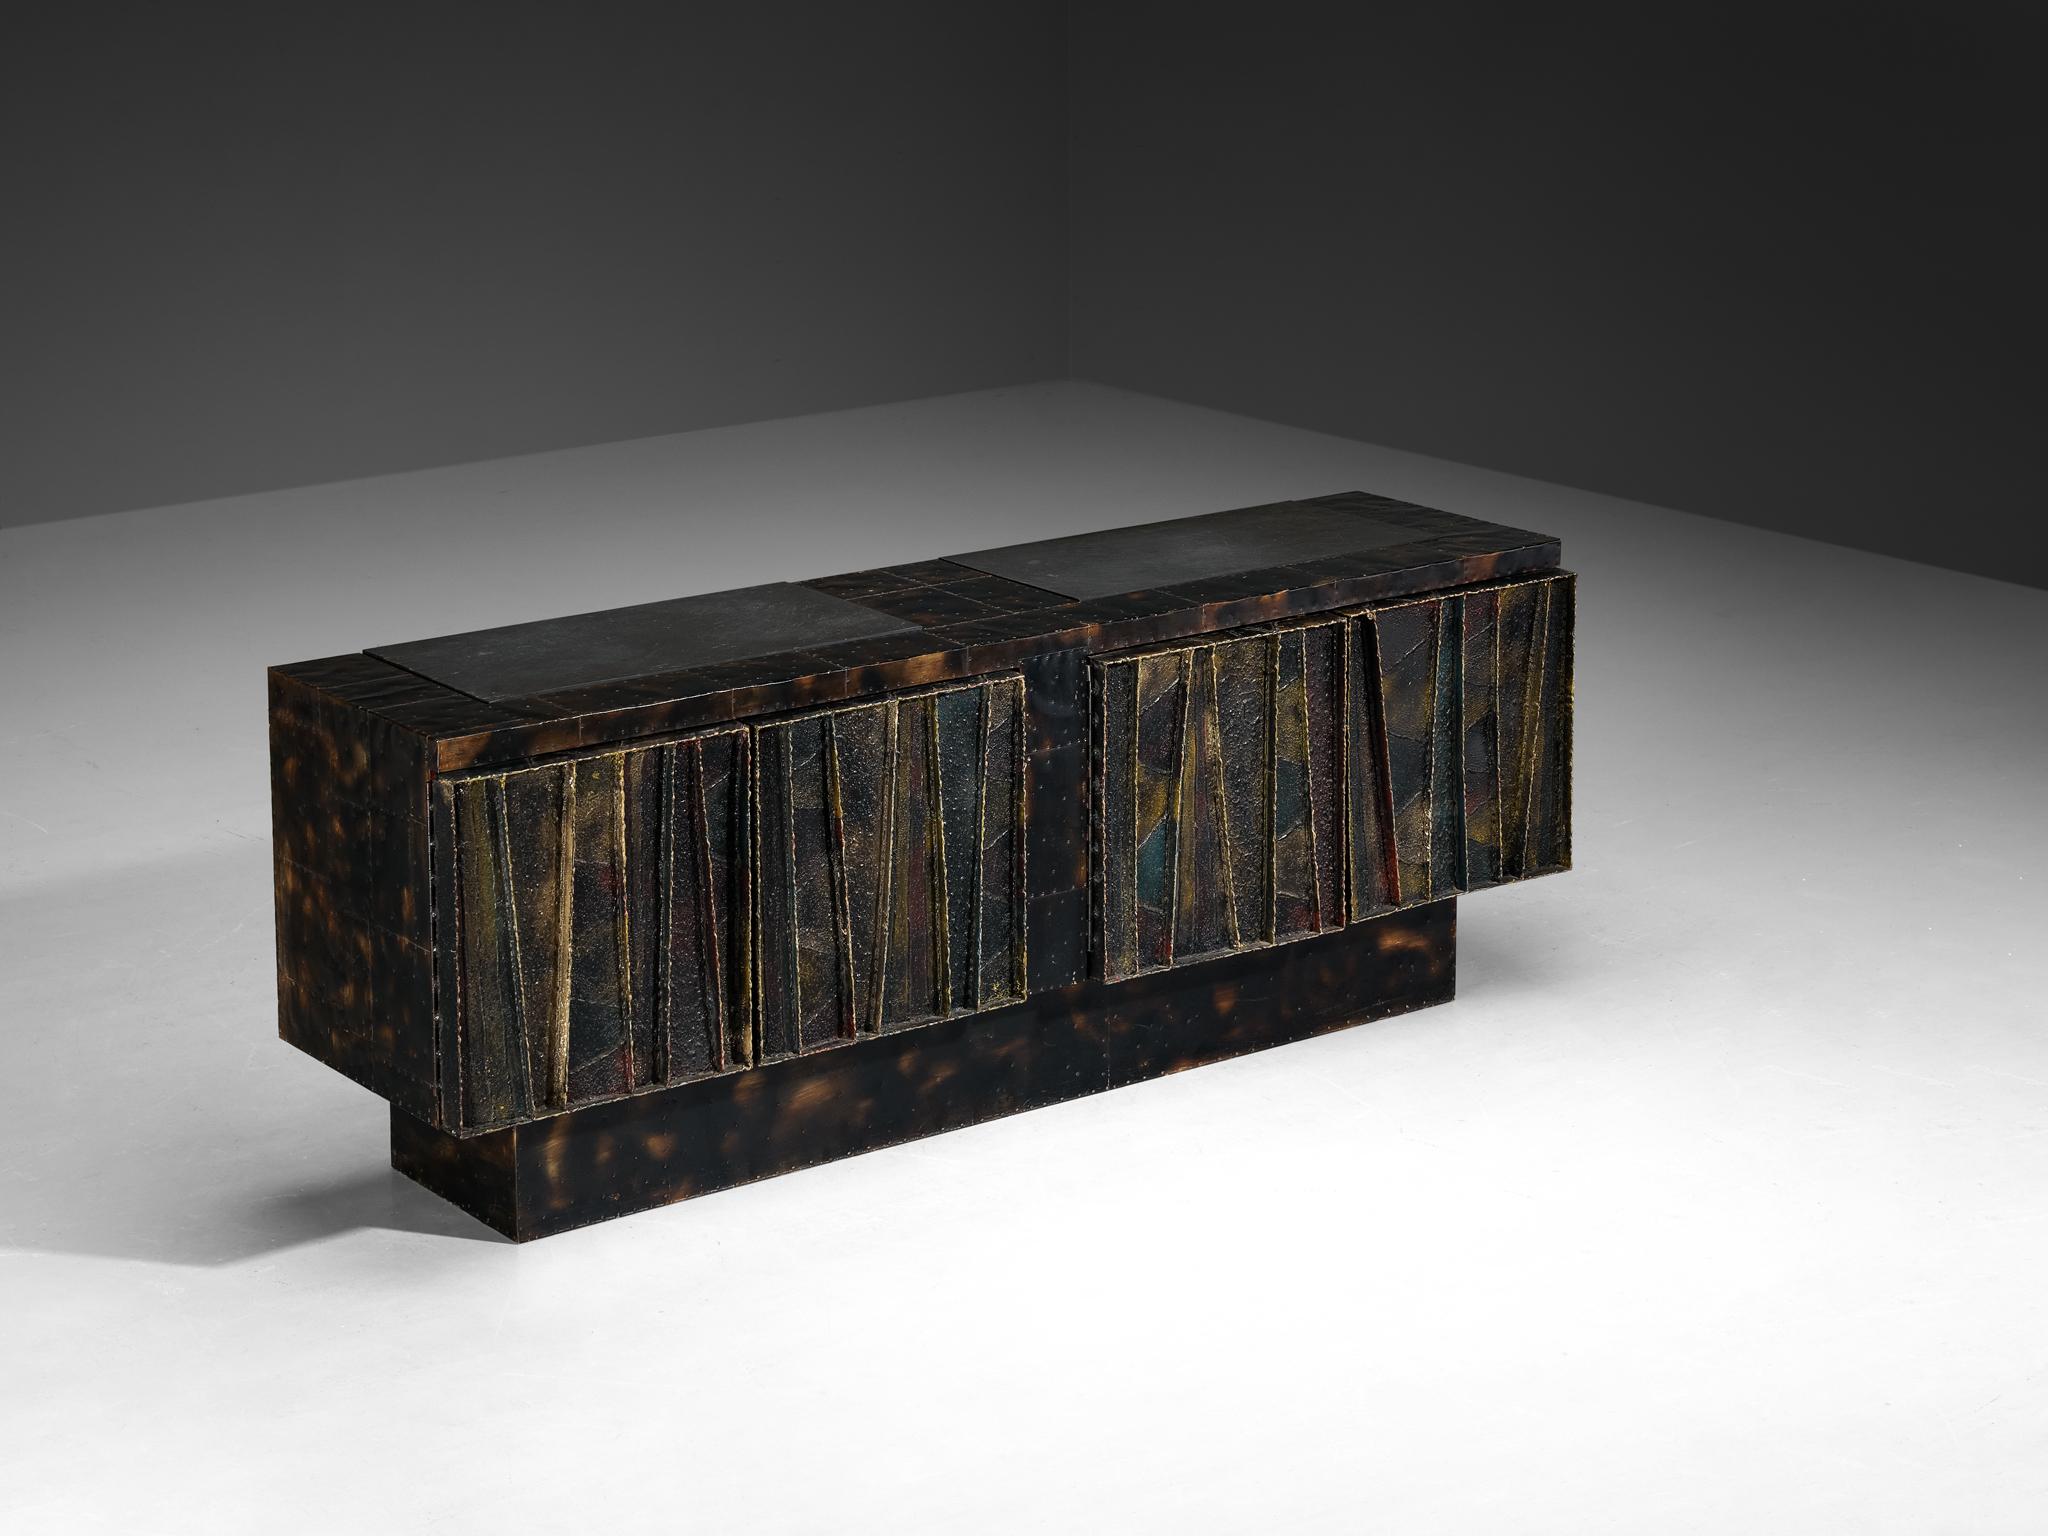 Paul Evans for Directional, 'PE-42' sideboard, welded steel, painted wood, cleft slate, United States, 1970s

An exceptional design by Paul Evans undeniably breathes artistic excellence combined with impeccable craftsmanship. This piece exemplifies